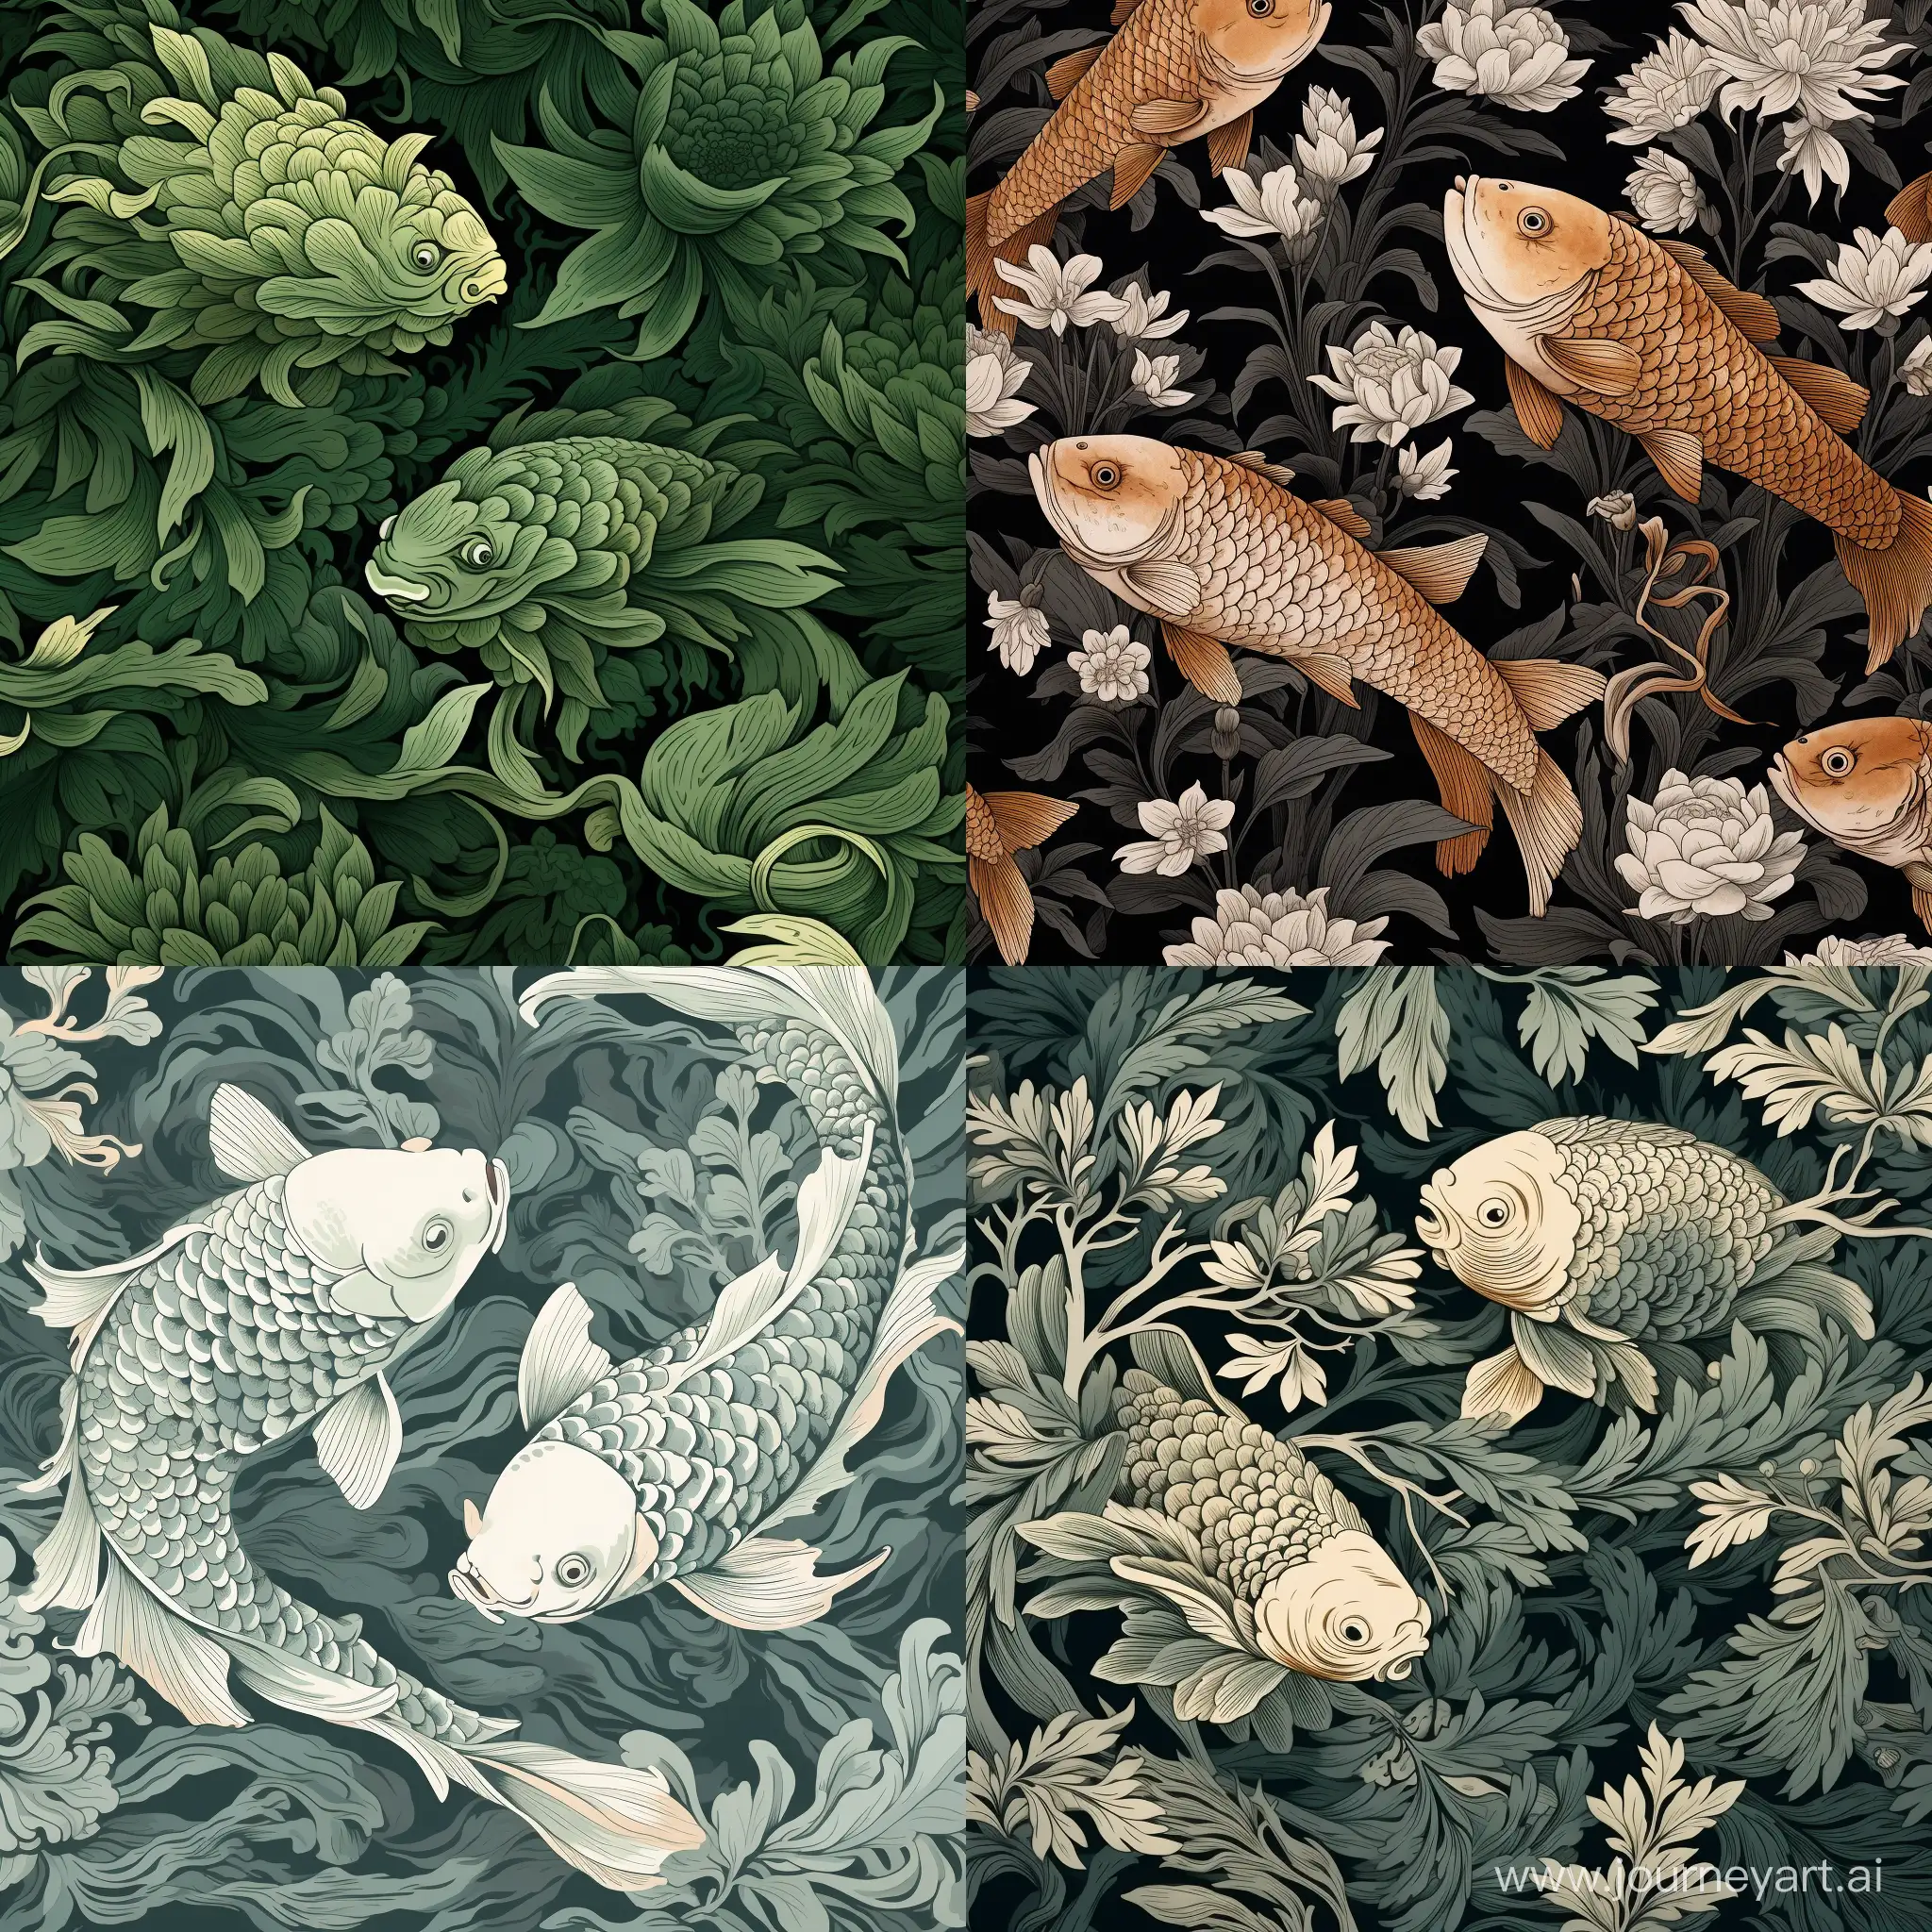 William Morris Inspired Painting carpes koï  vintage monochromatic color scheme, in flat style